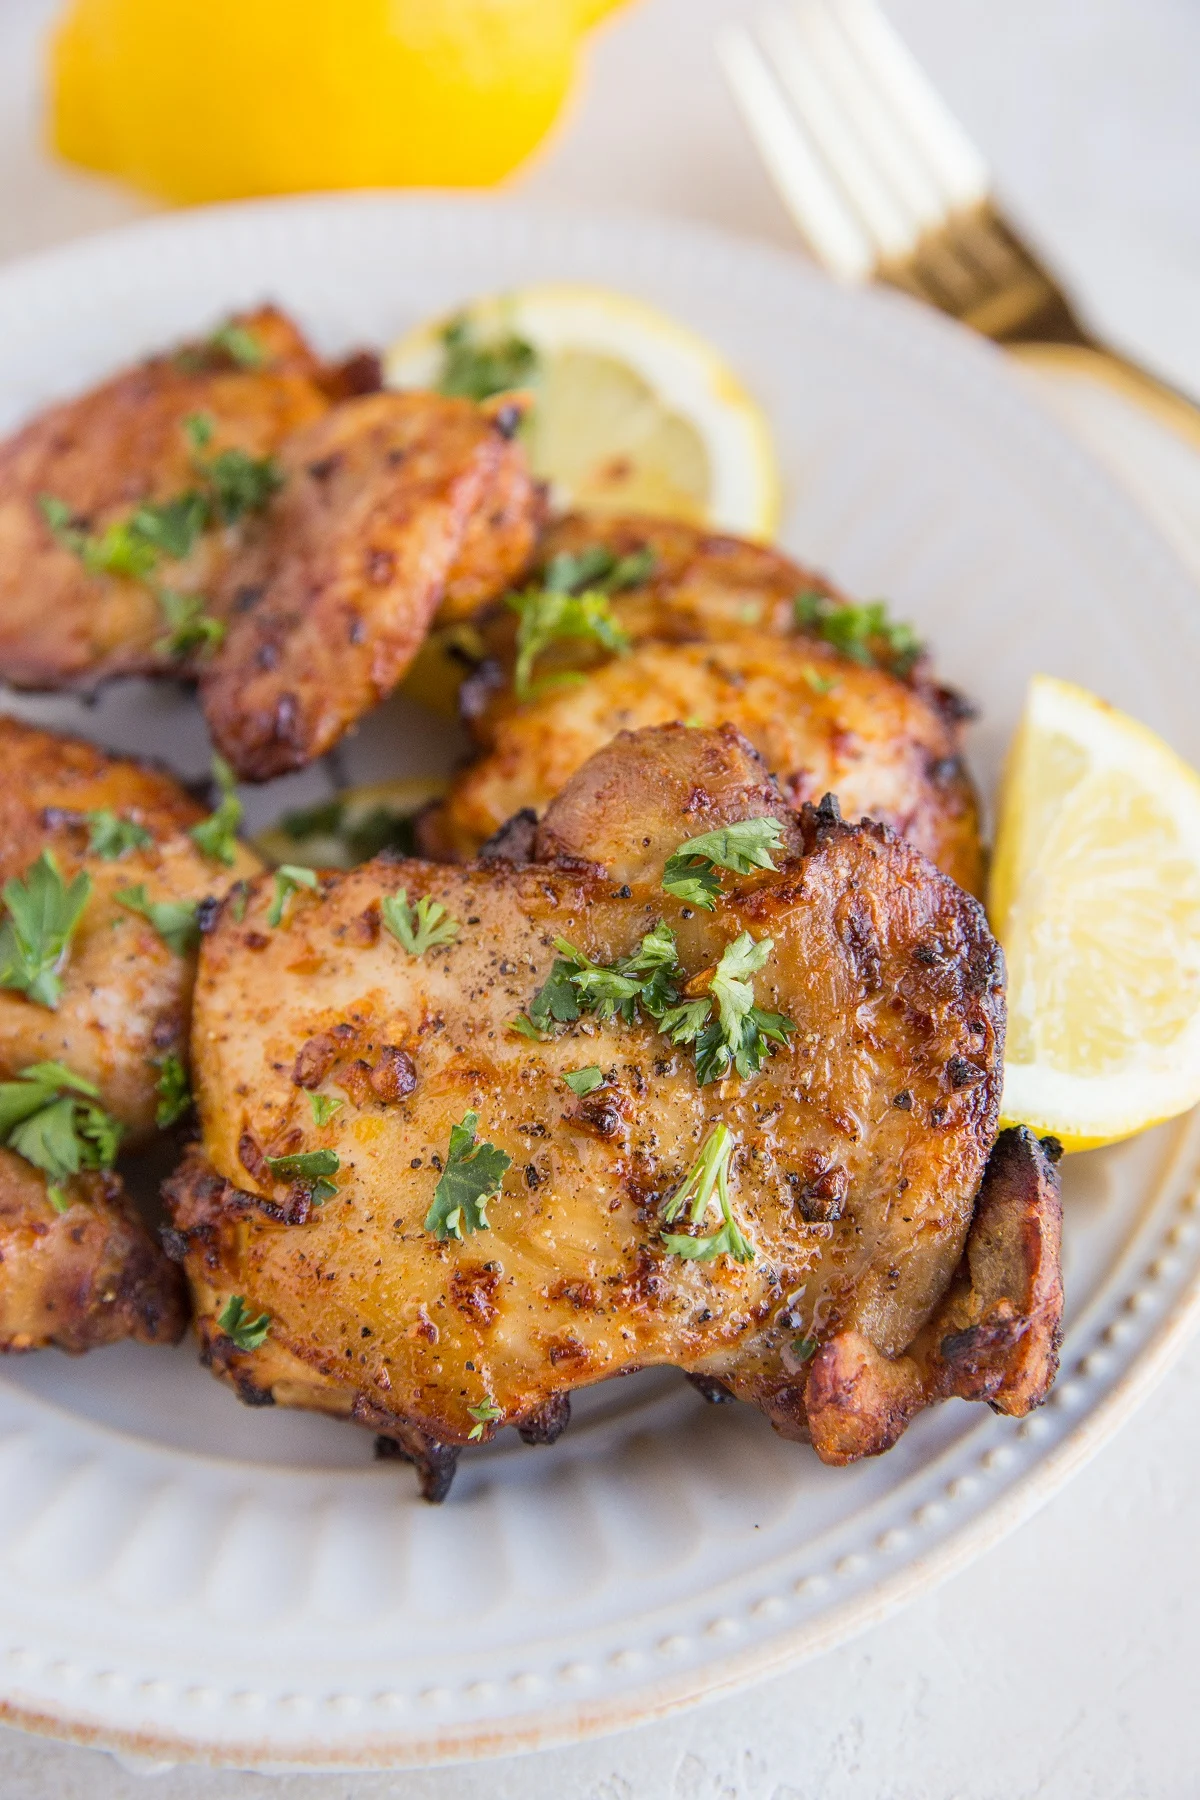 Lemon garlic chicken thighs on a white plate sprinkled with parsley and a slice of lemon